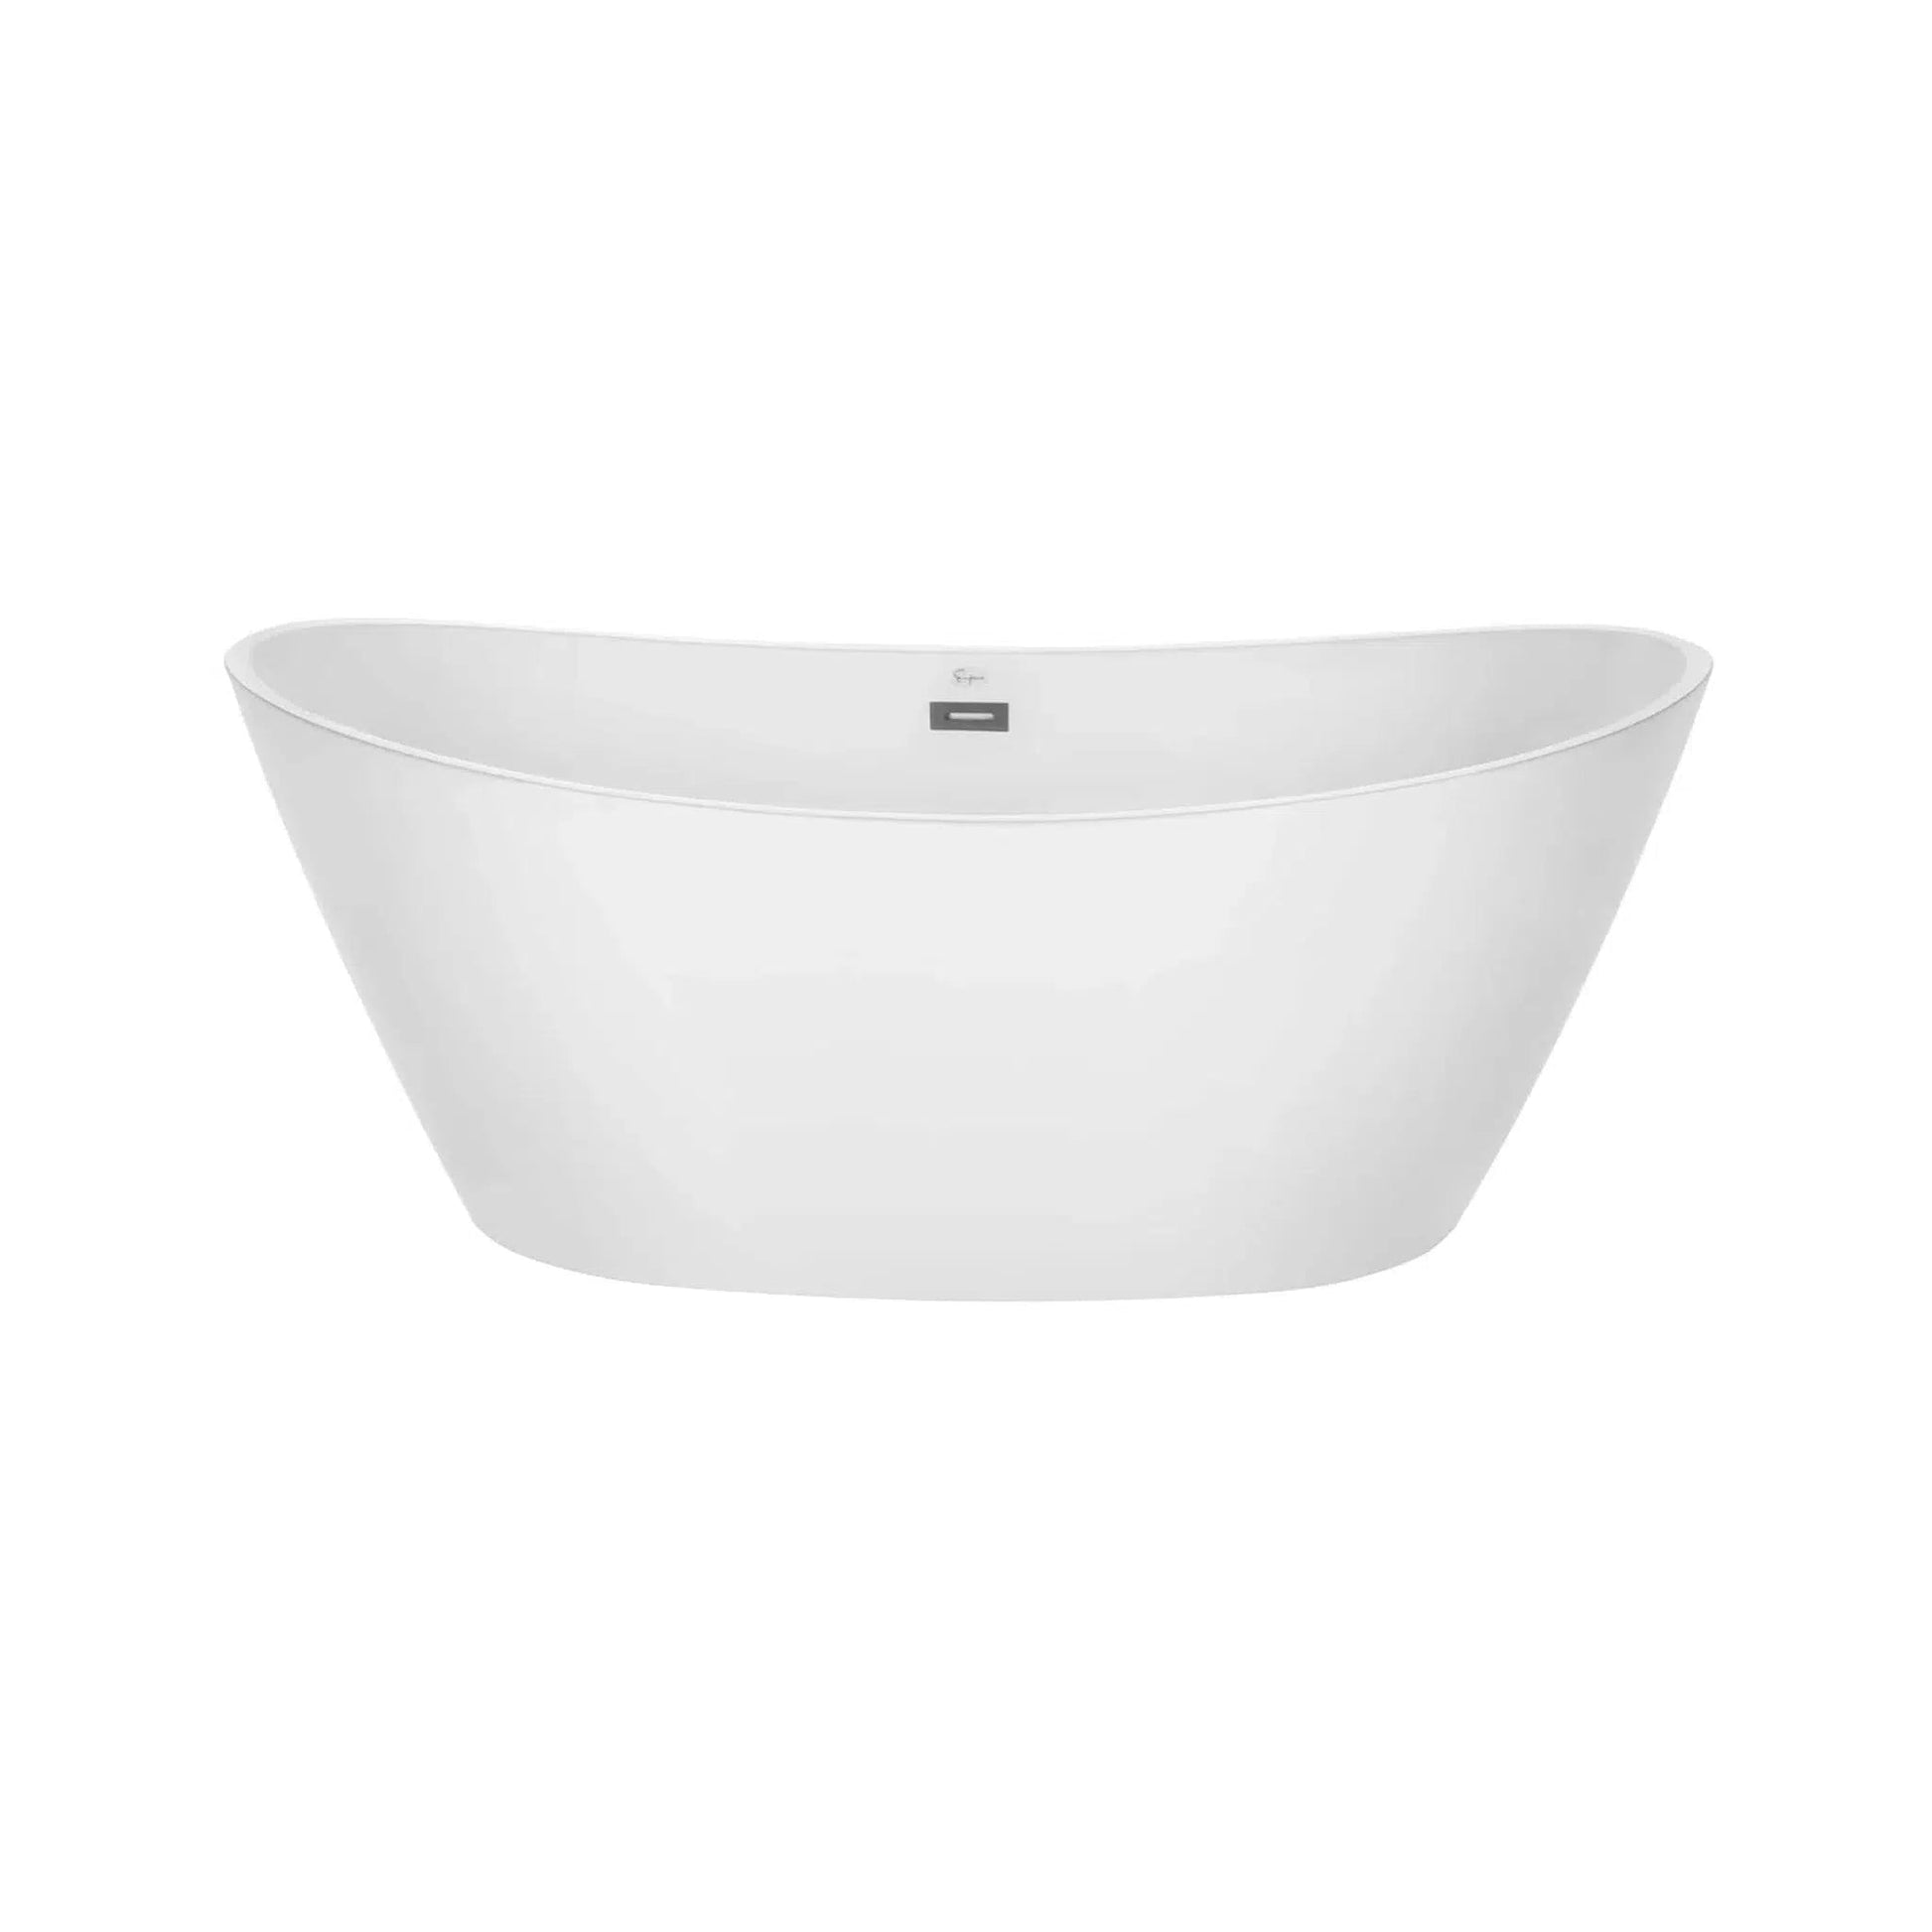 Empava 59" White Freestanding Oval Soaking Bathtub With LED Strip Below With Center Drain